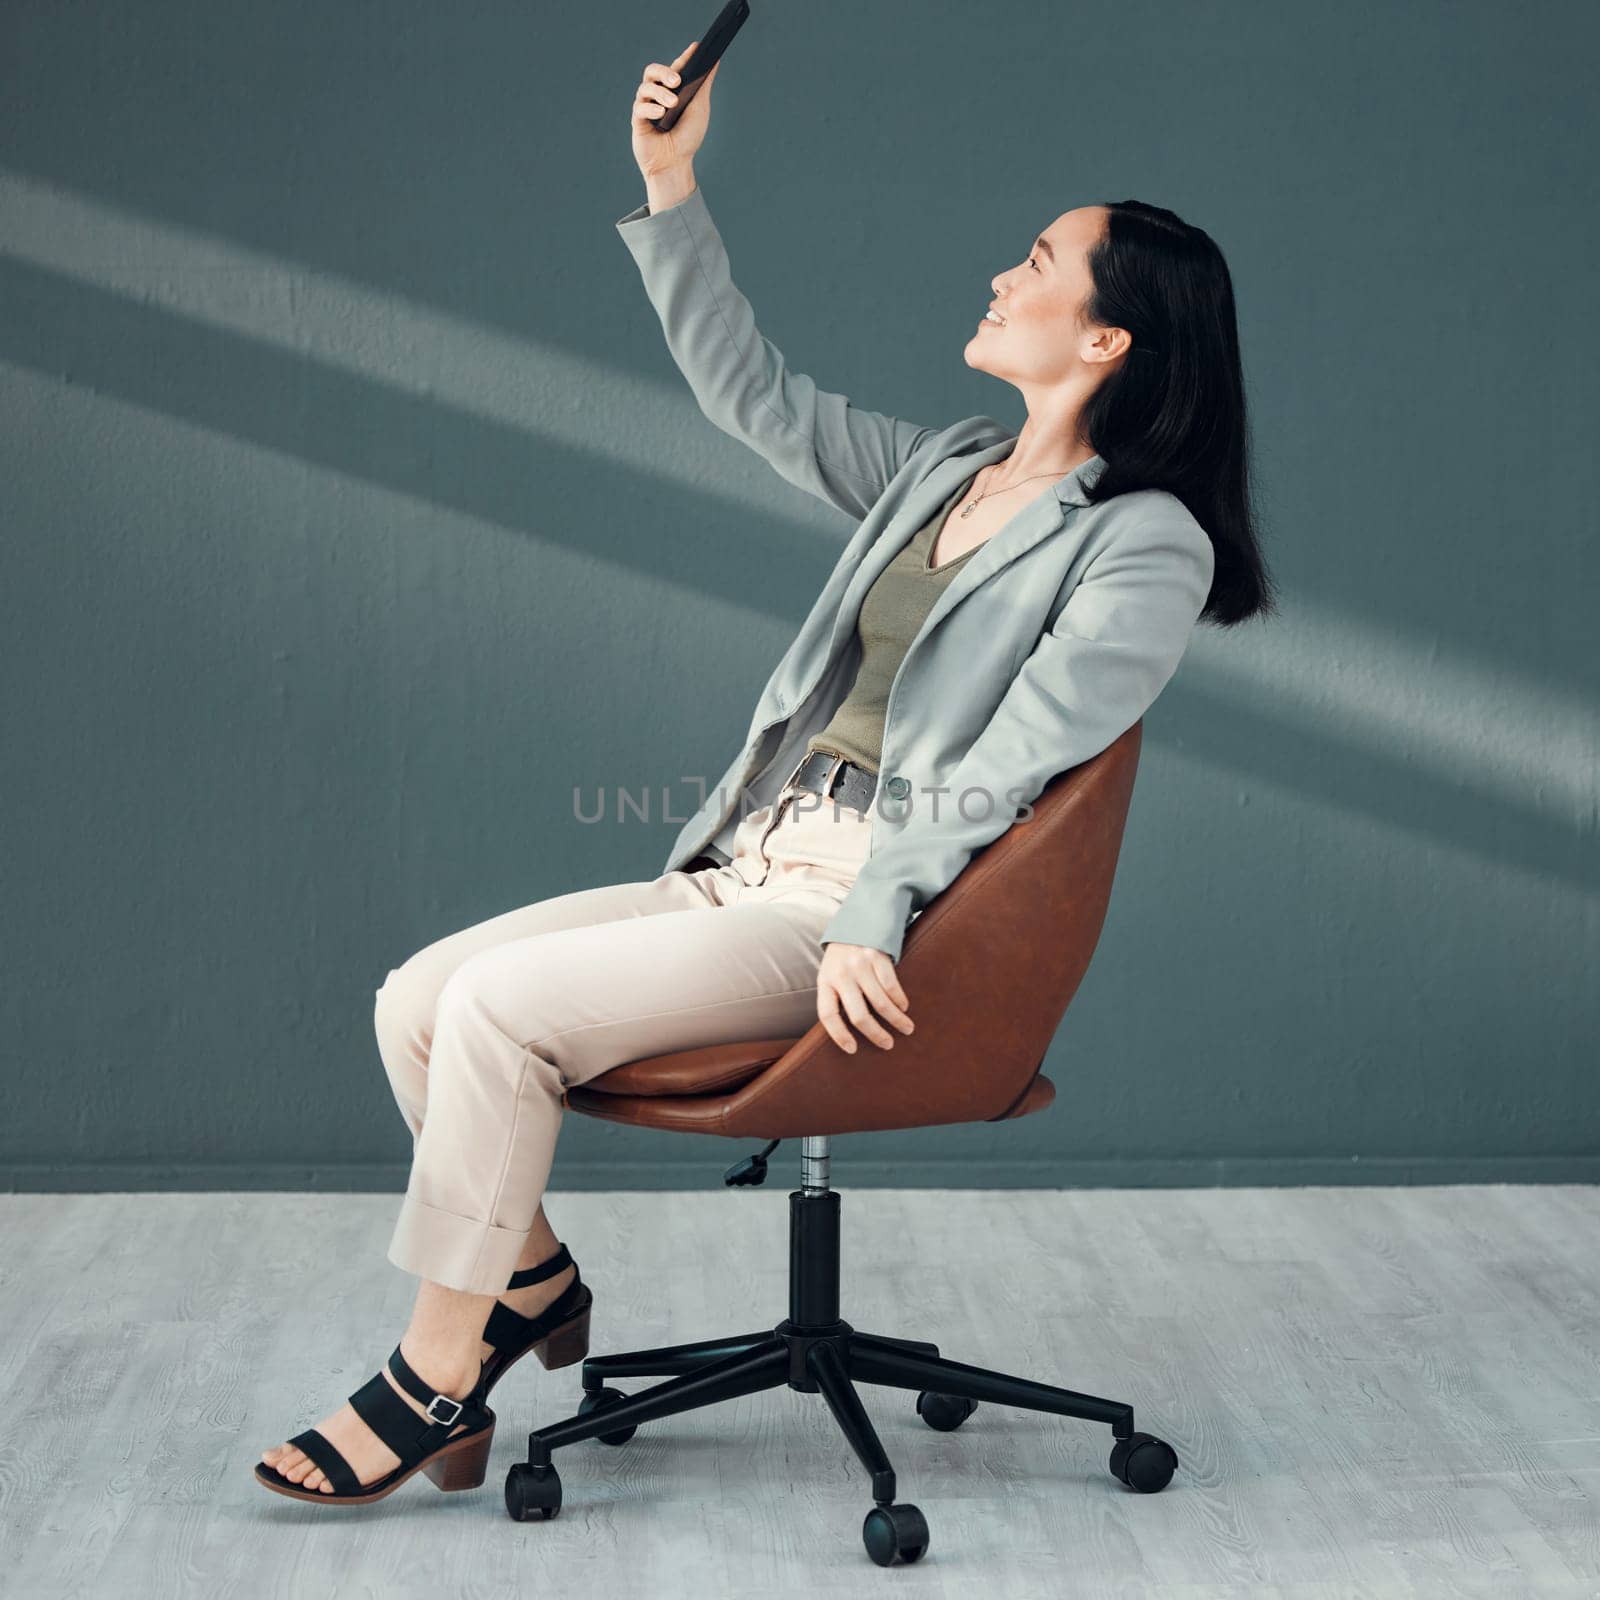 Selfie, video call and woman with a phone for connection, internet and communication at work on a chair. Corporate and Asian employee reading an email, message or chat on a mobile app in an office by YuriArcurs